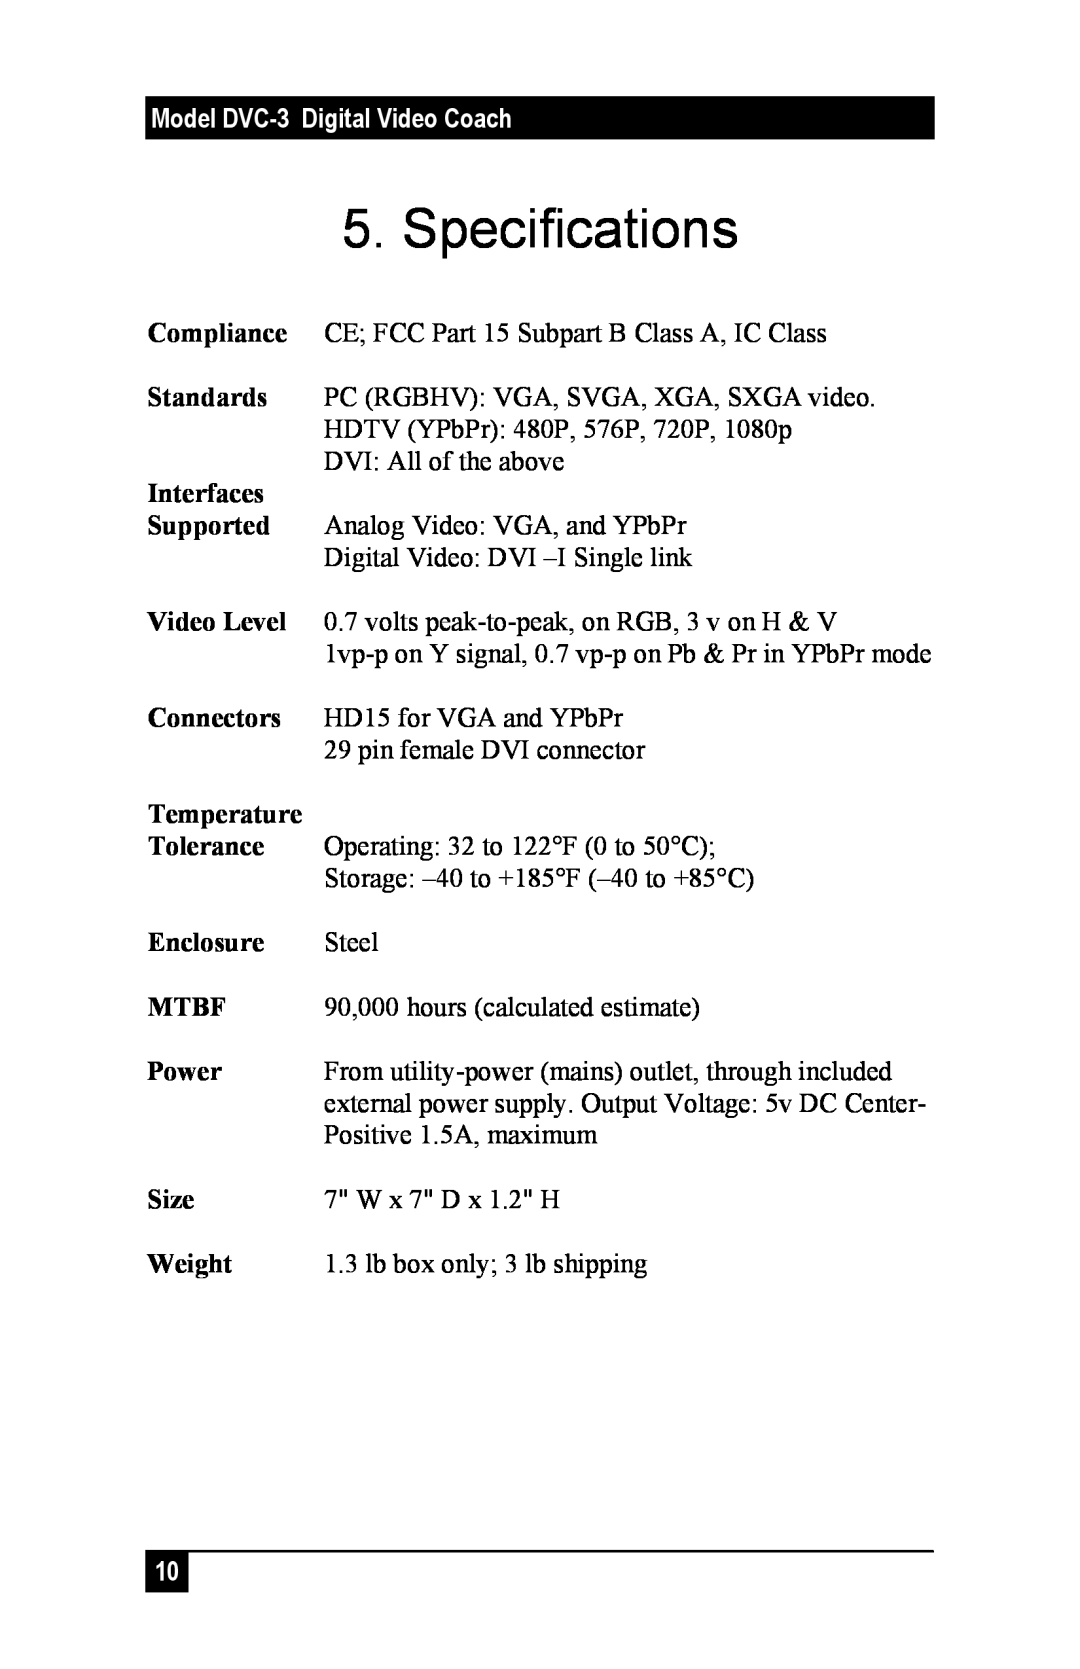 Sun Microsystems DVC-3 manual Specifications, Interfaces, Temperature, Enclosure, Mtbf, Power, Size, Weight 